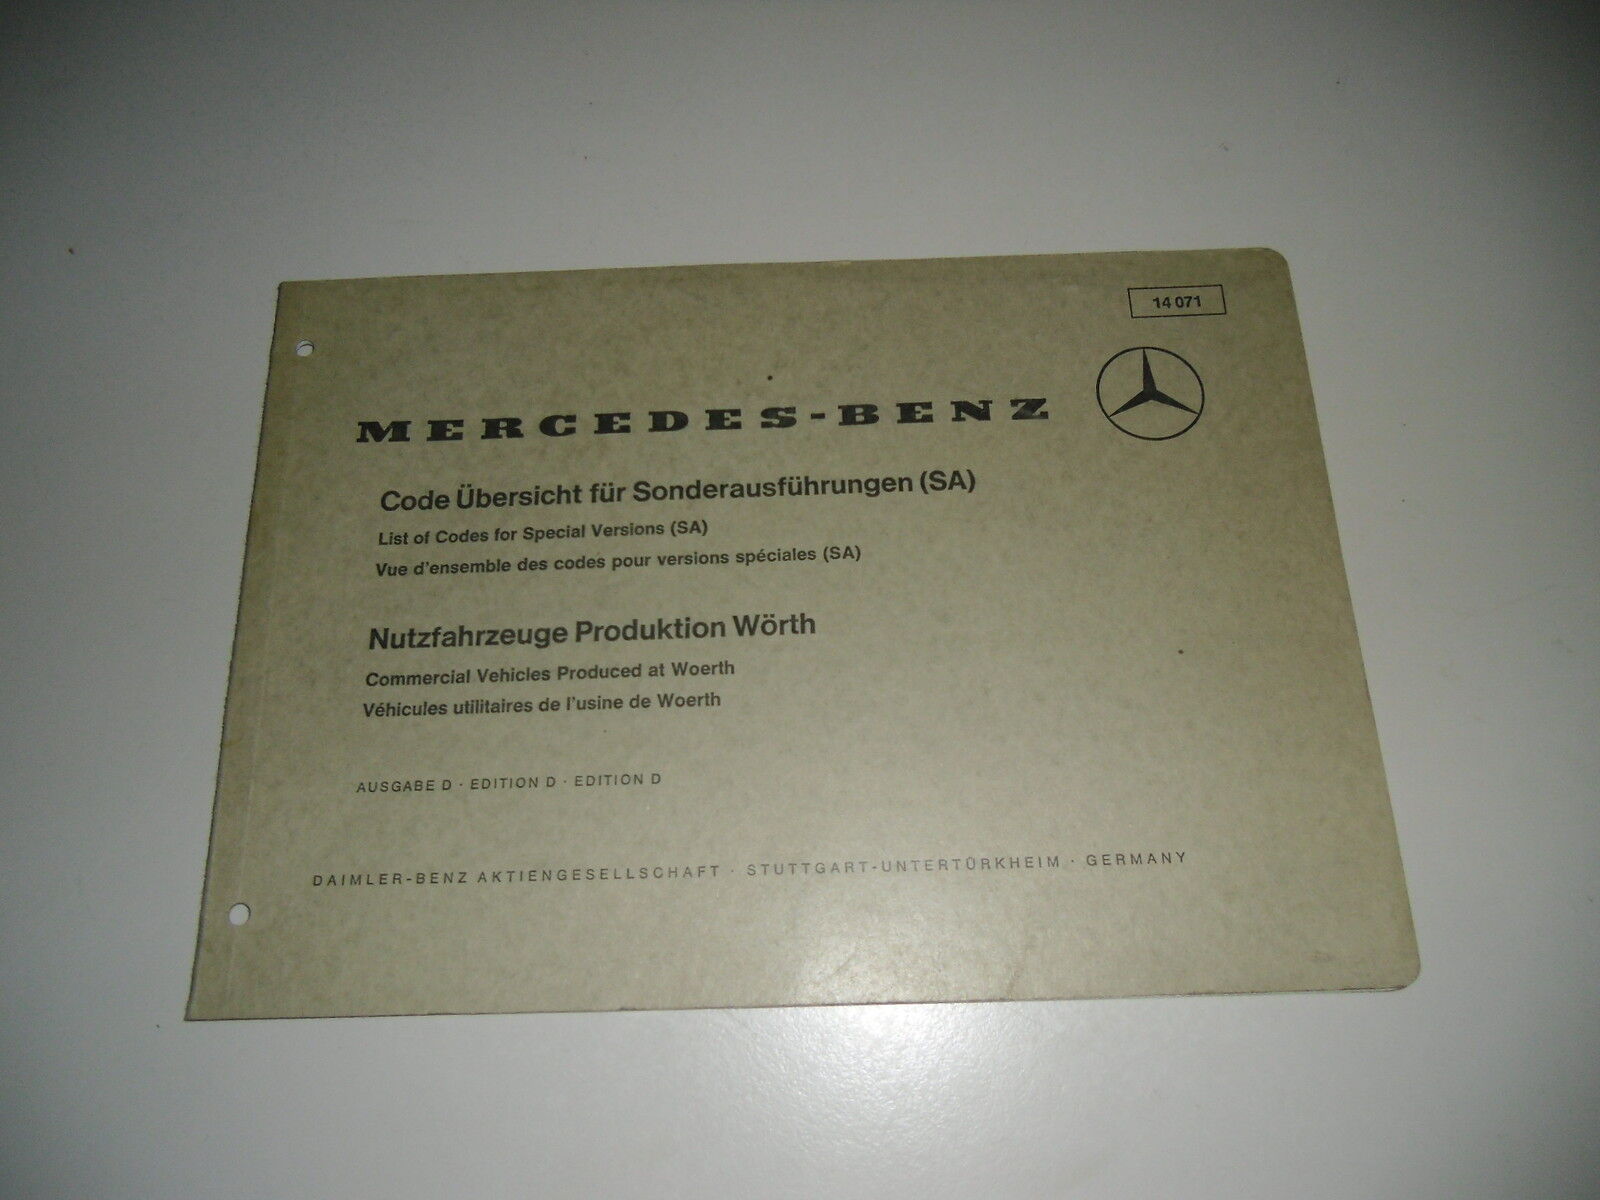 Mercedes Benz Code overview for special remarks Truck Edition D